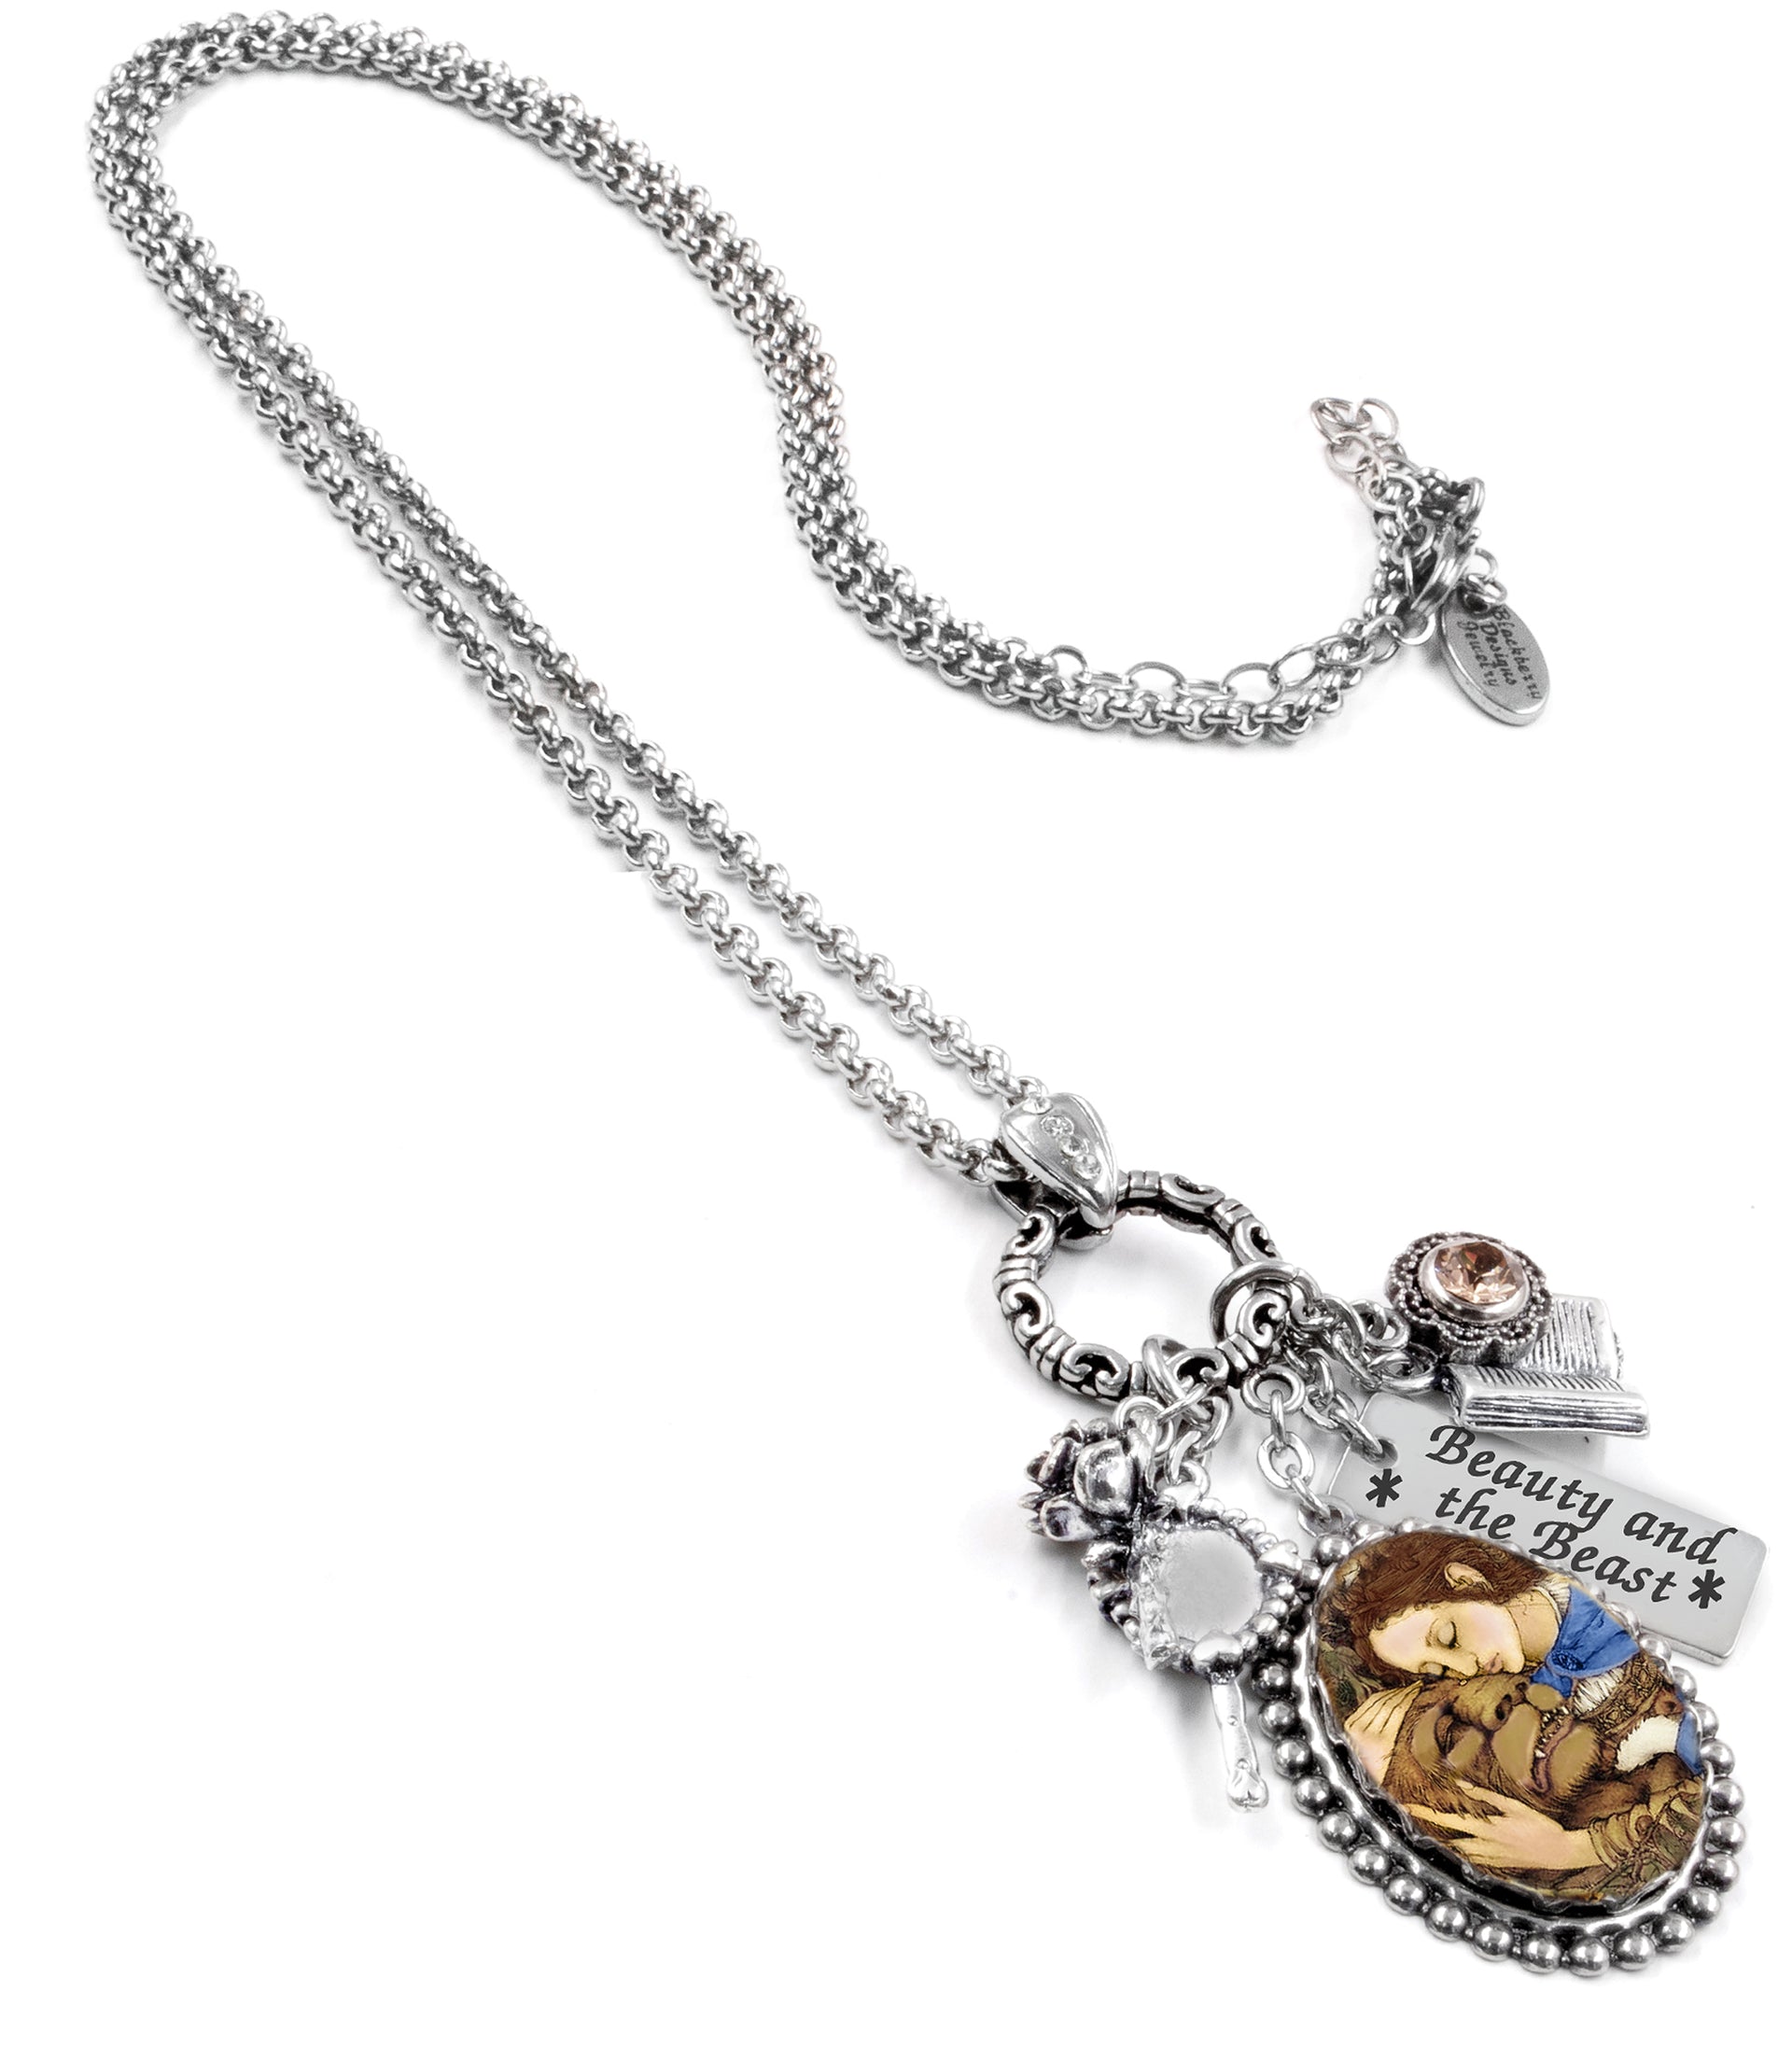 Beauty and The Beast + Stainless Steel + Necklaces + 22 Inches + Women's + Necklaces